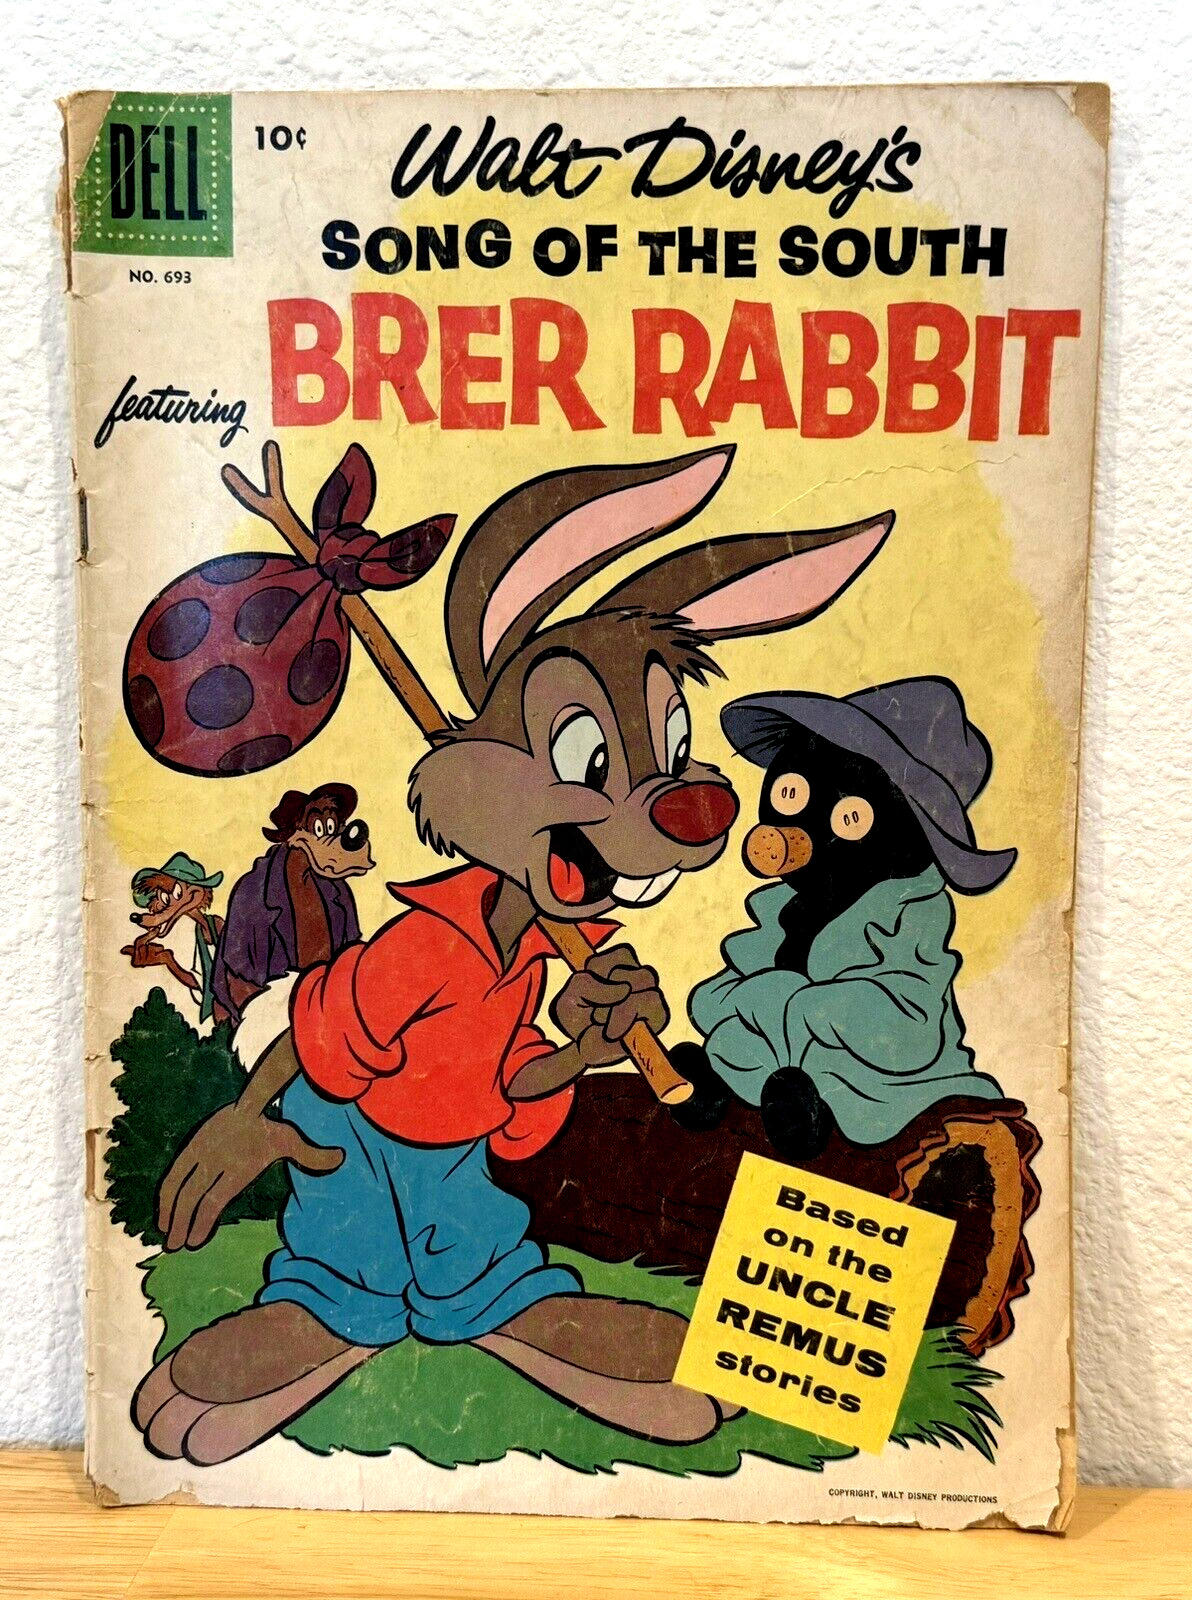 VINTAGE 1956 DISNEY DELL SONG OF THE SOUTH BRER RABBIT 693 COMIC BOOK POOR GRADE